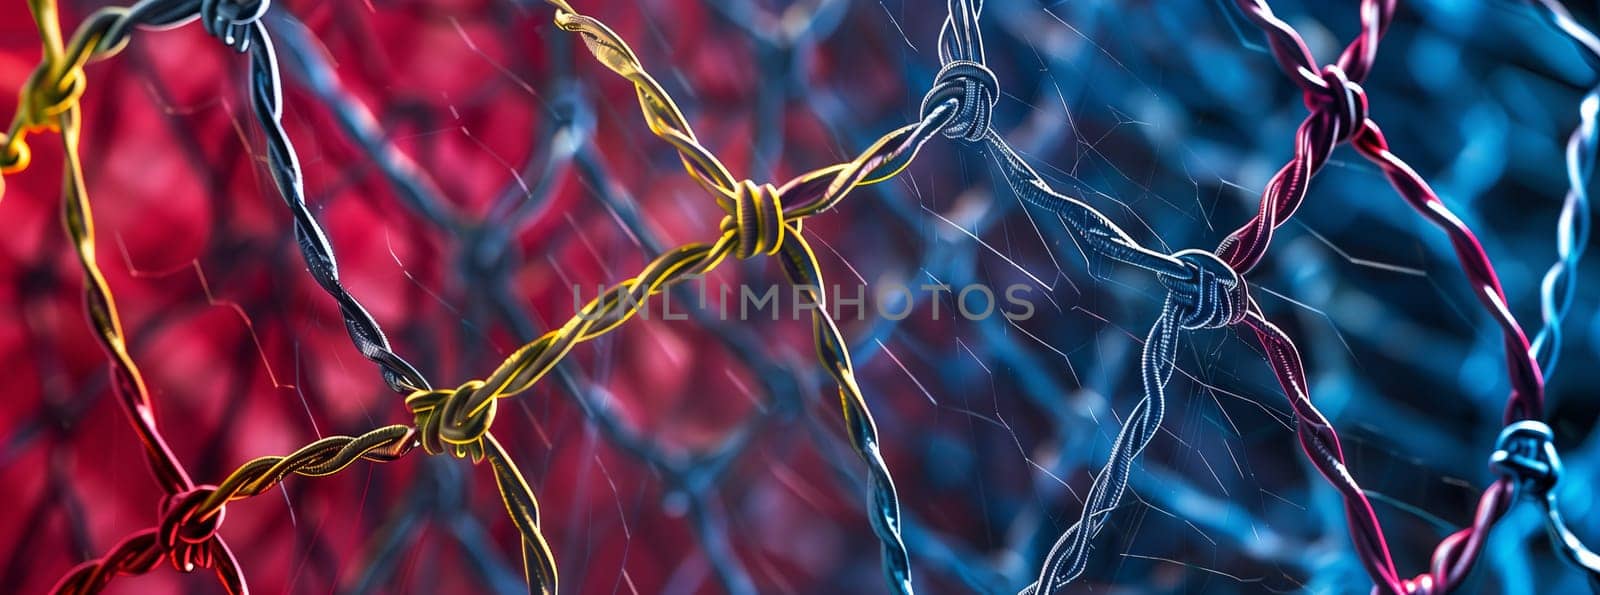 Closeup of net with Water background in shades of Magenta and Electric blue by richwolf